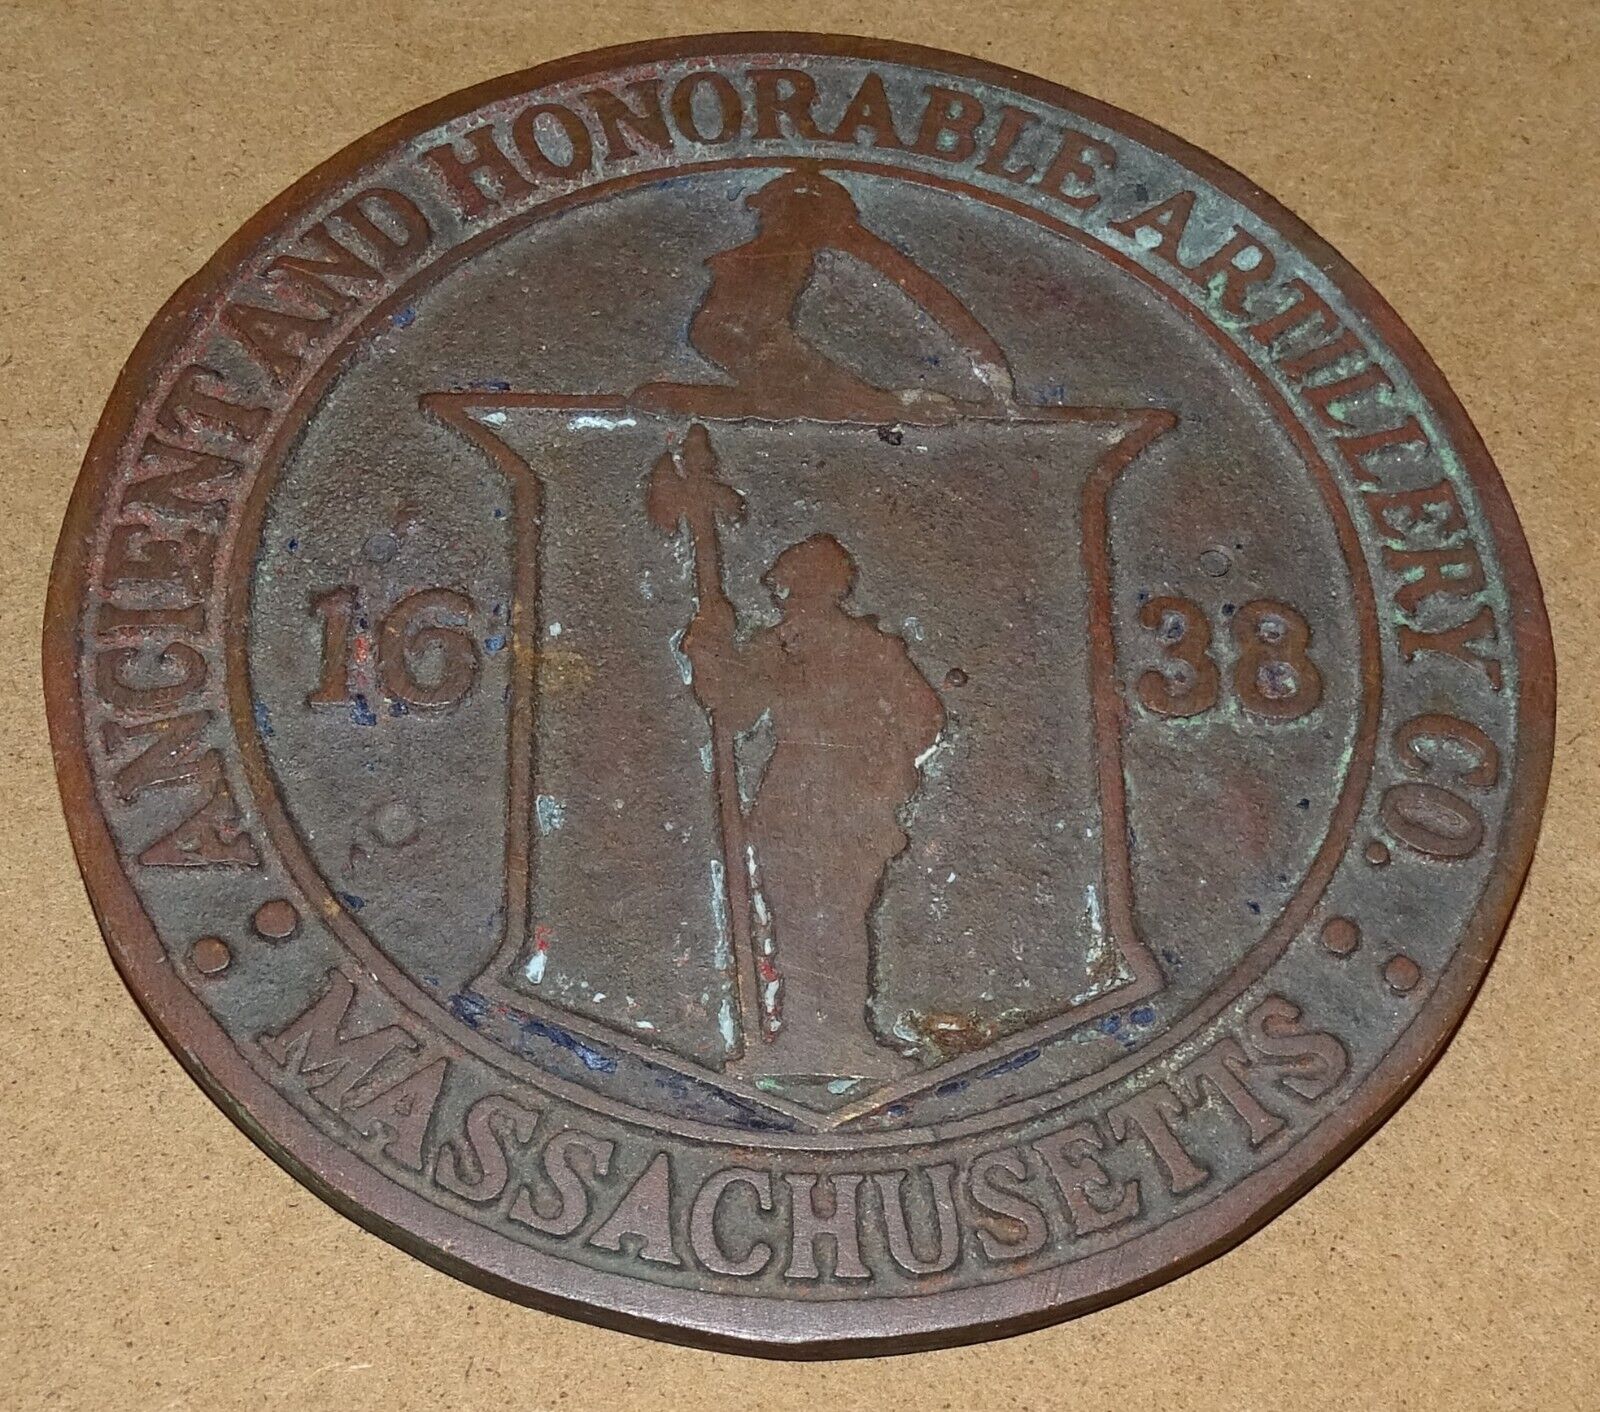 Circa 1930s Metal Plaque ANCIENT AND HONORABLE ARTILLERY CO. MASSACHUSETTS